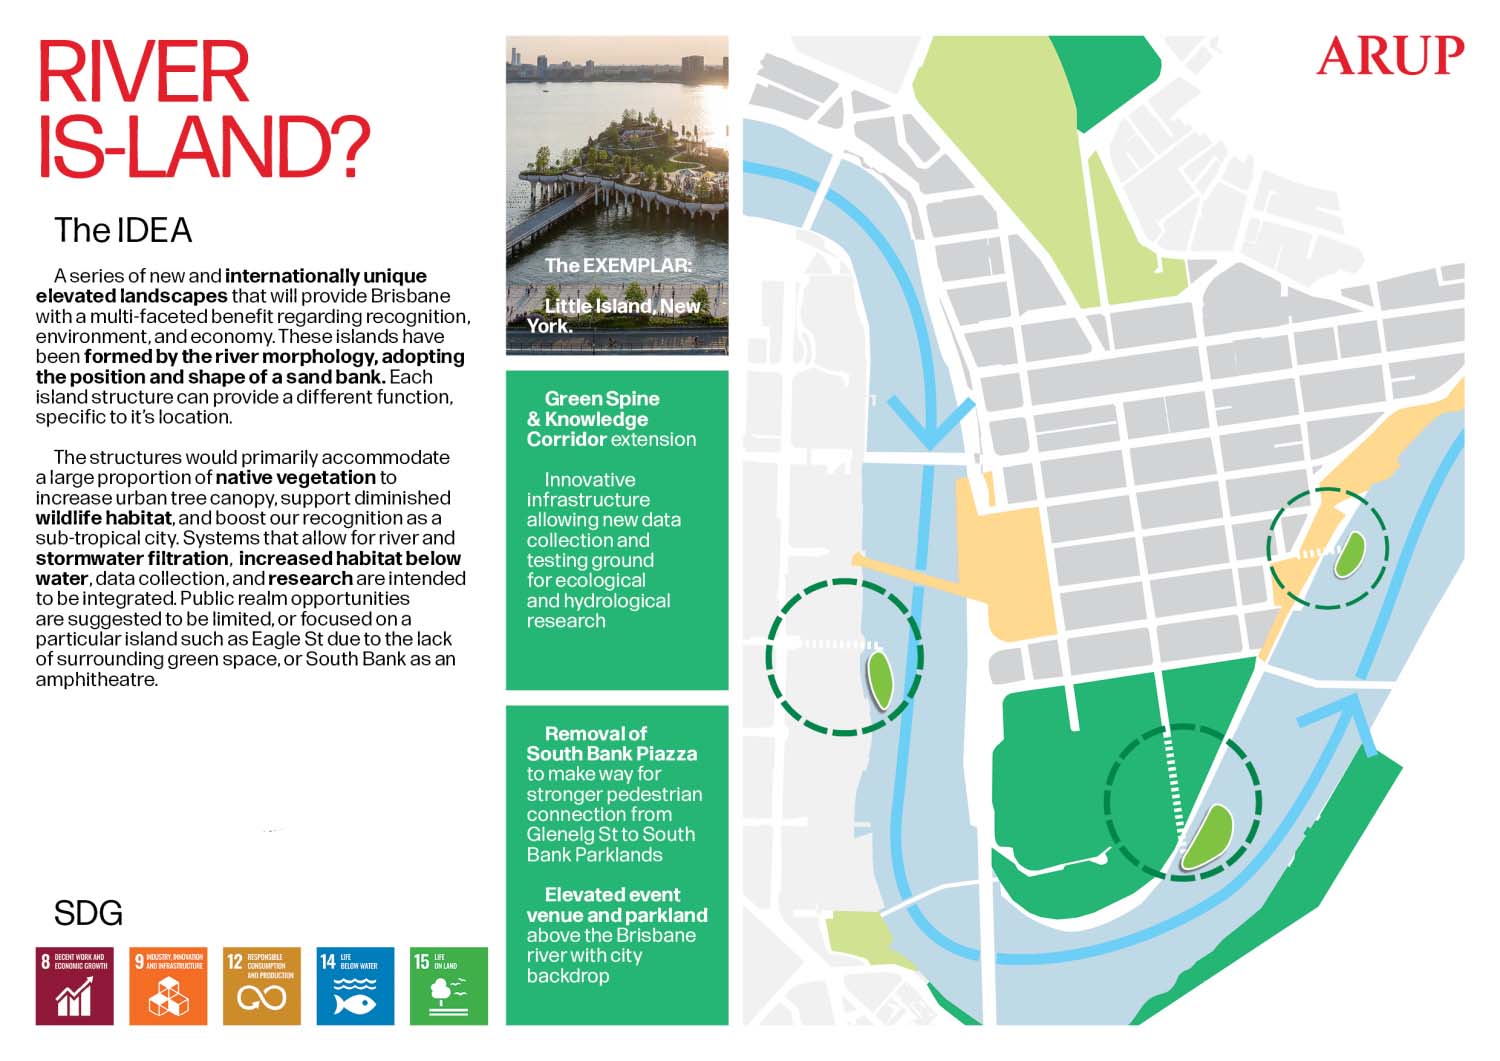 River Is-land - Jared Hall, ARUP